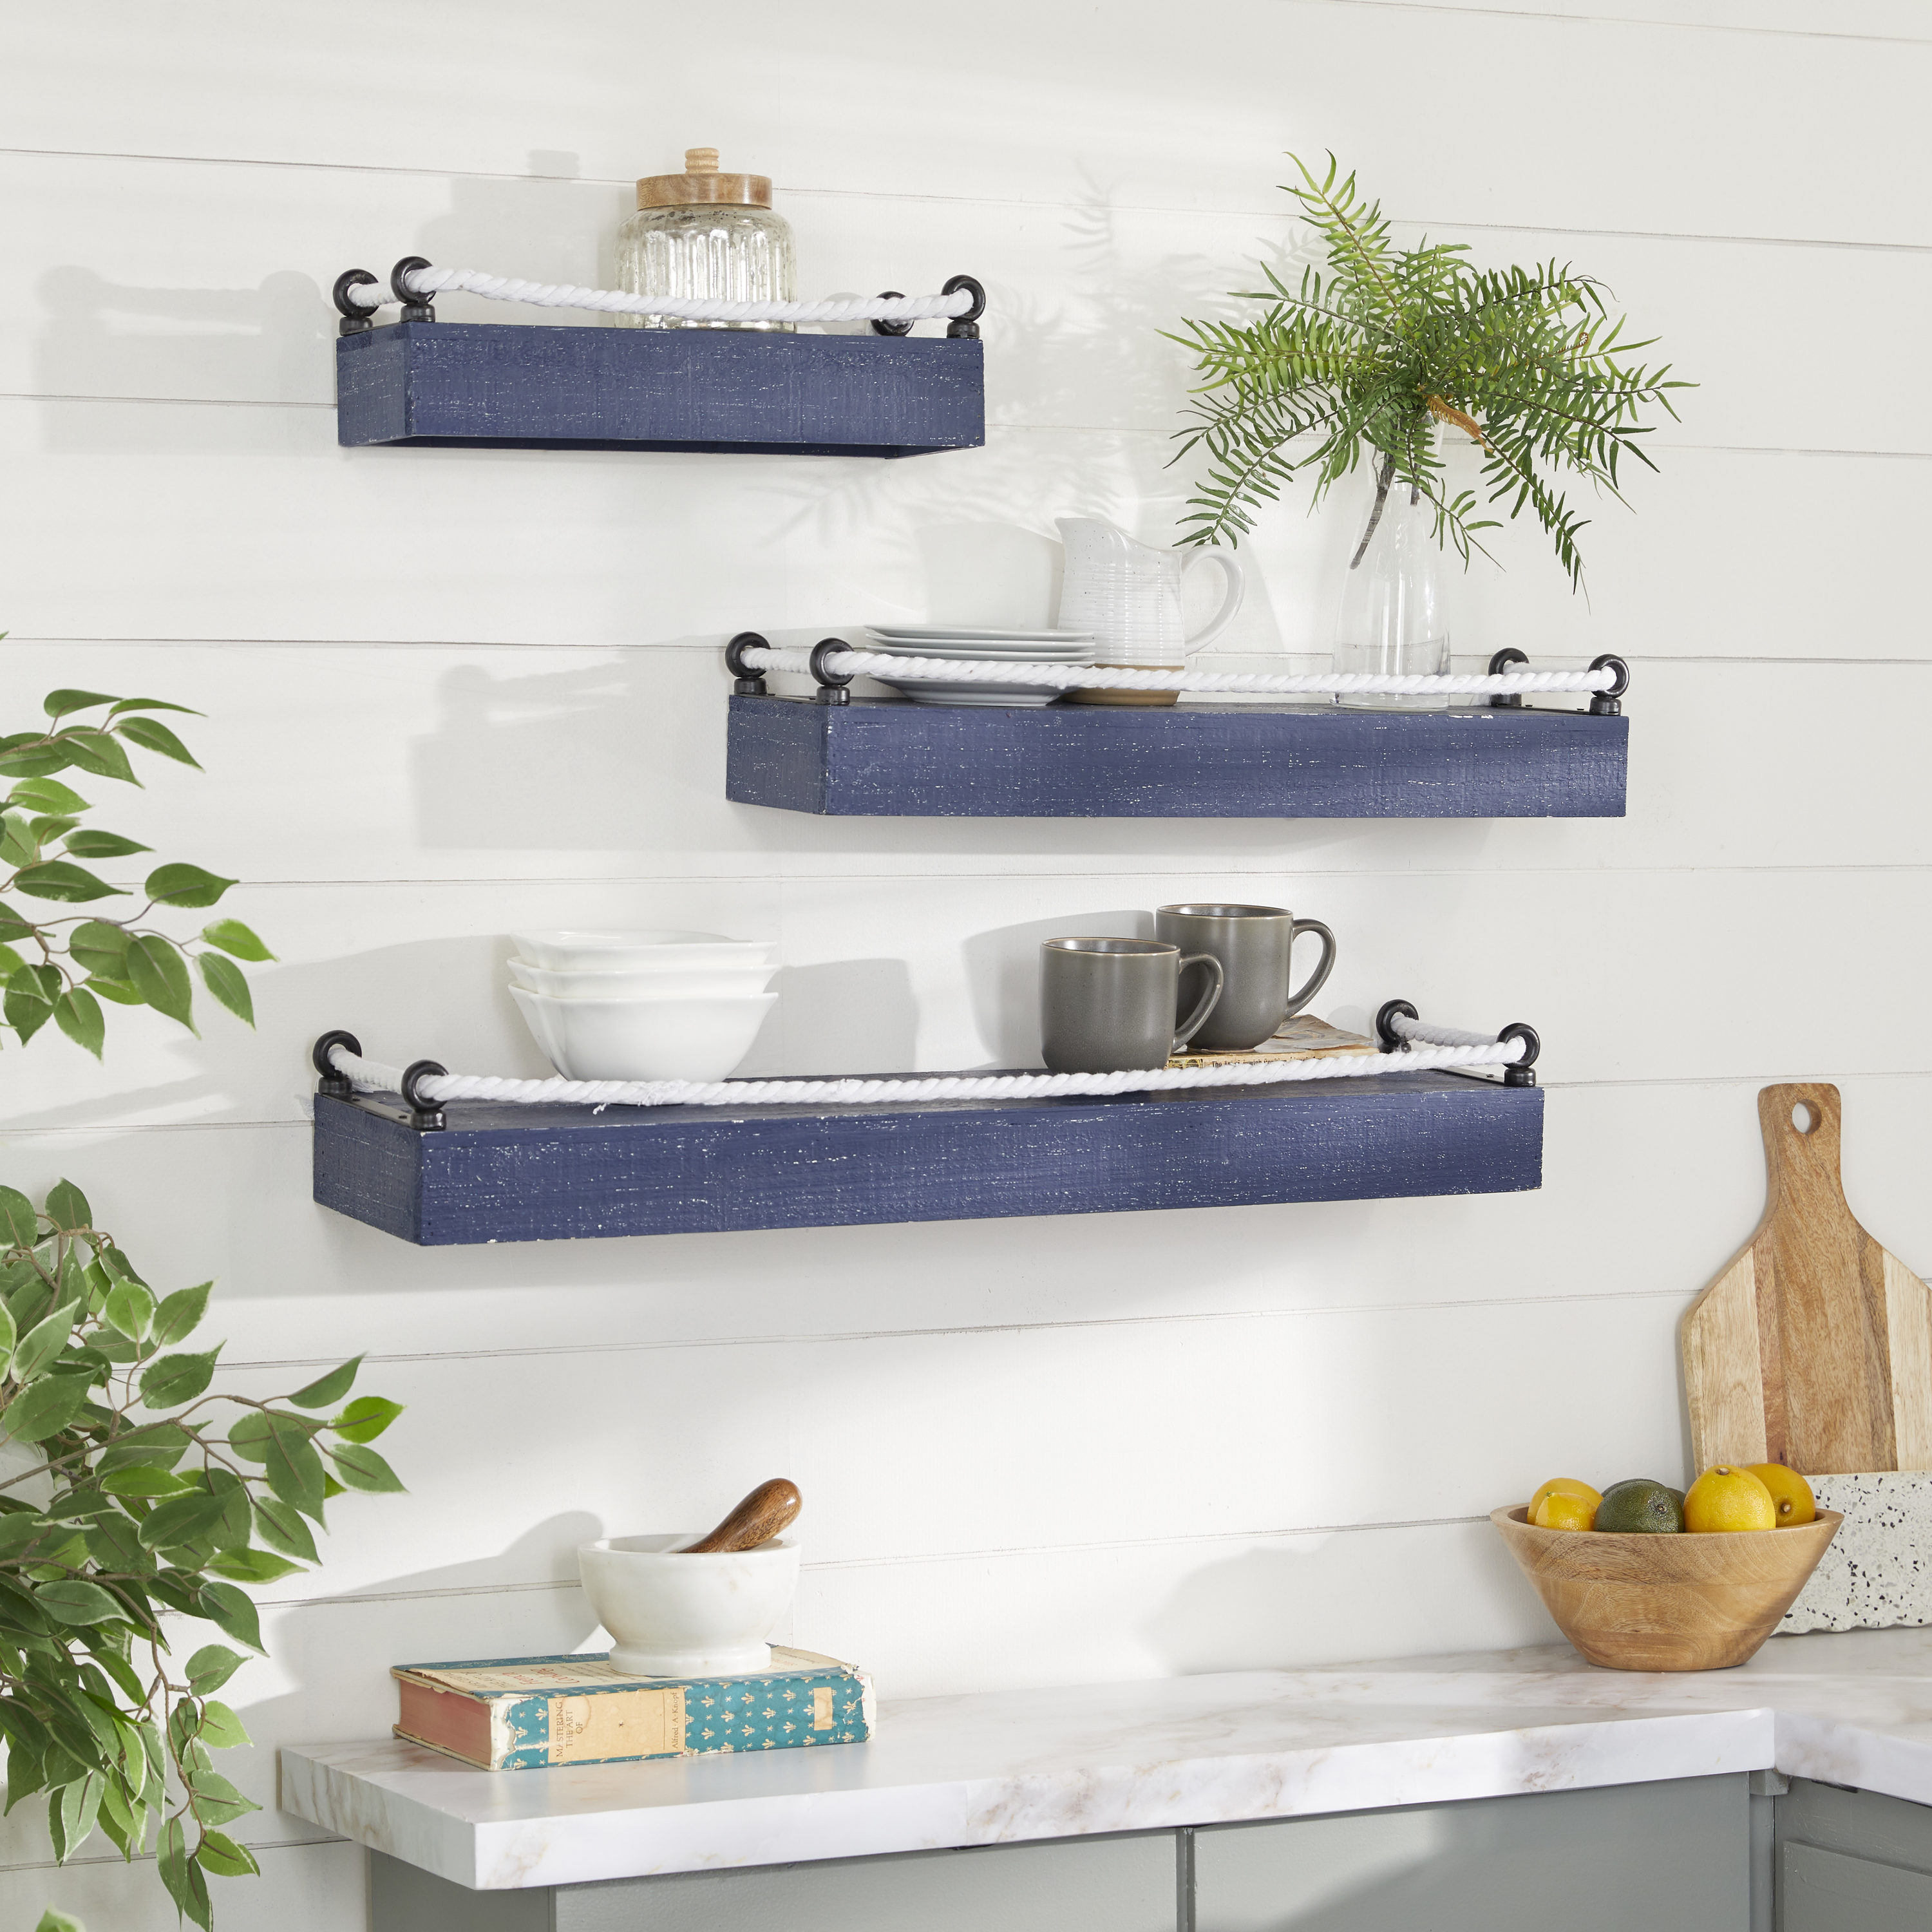 Bathroom Shelves Over Toilet, Floating Bathroom Shelves Wall Mounted with Wire Basket, Wood Floating Shelf for Wall Dcor, Bathroom Wall dcor Shelves